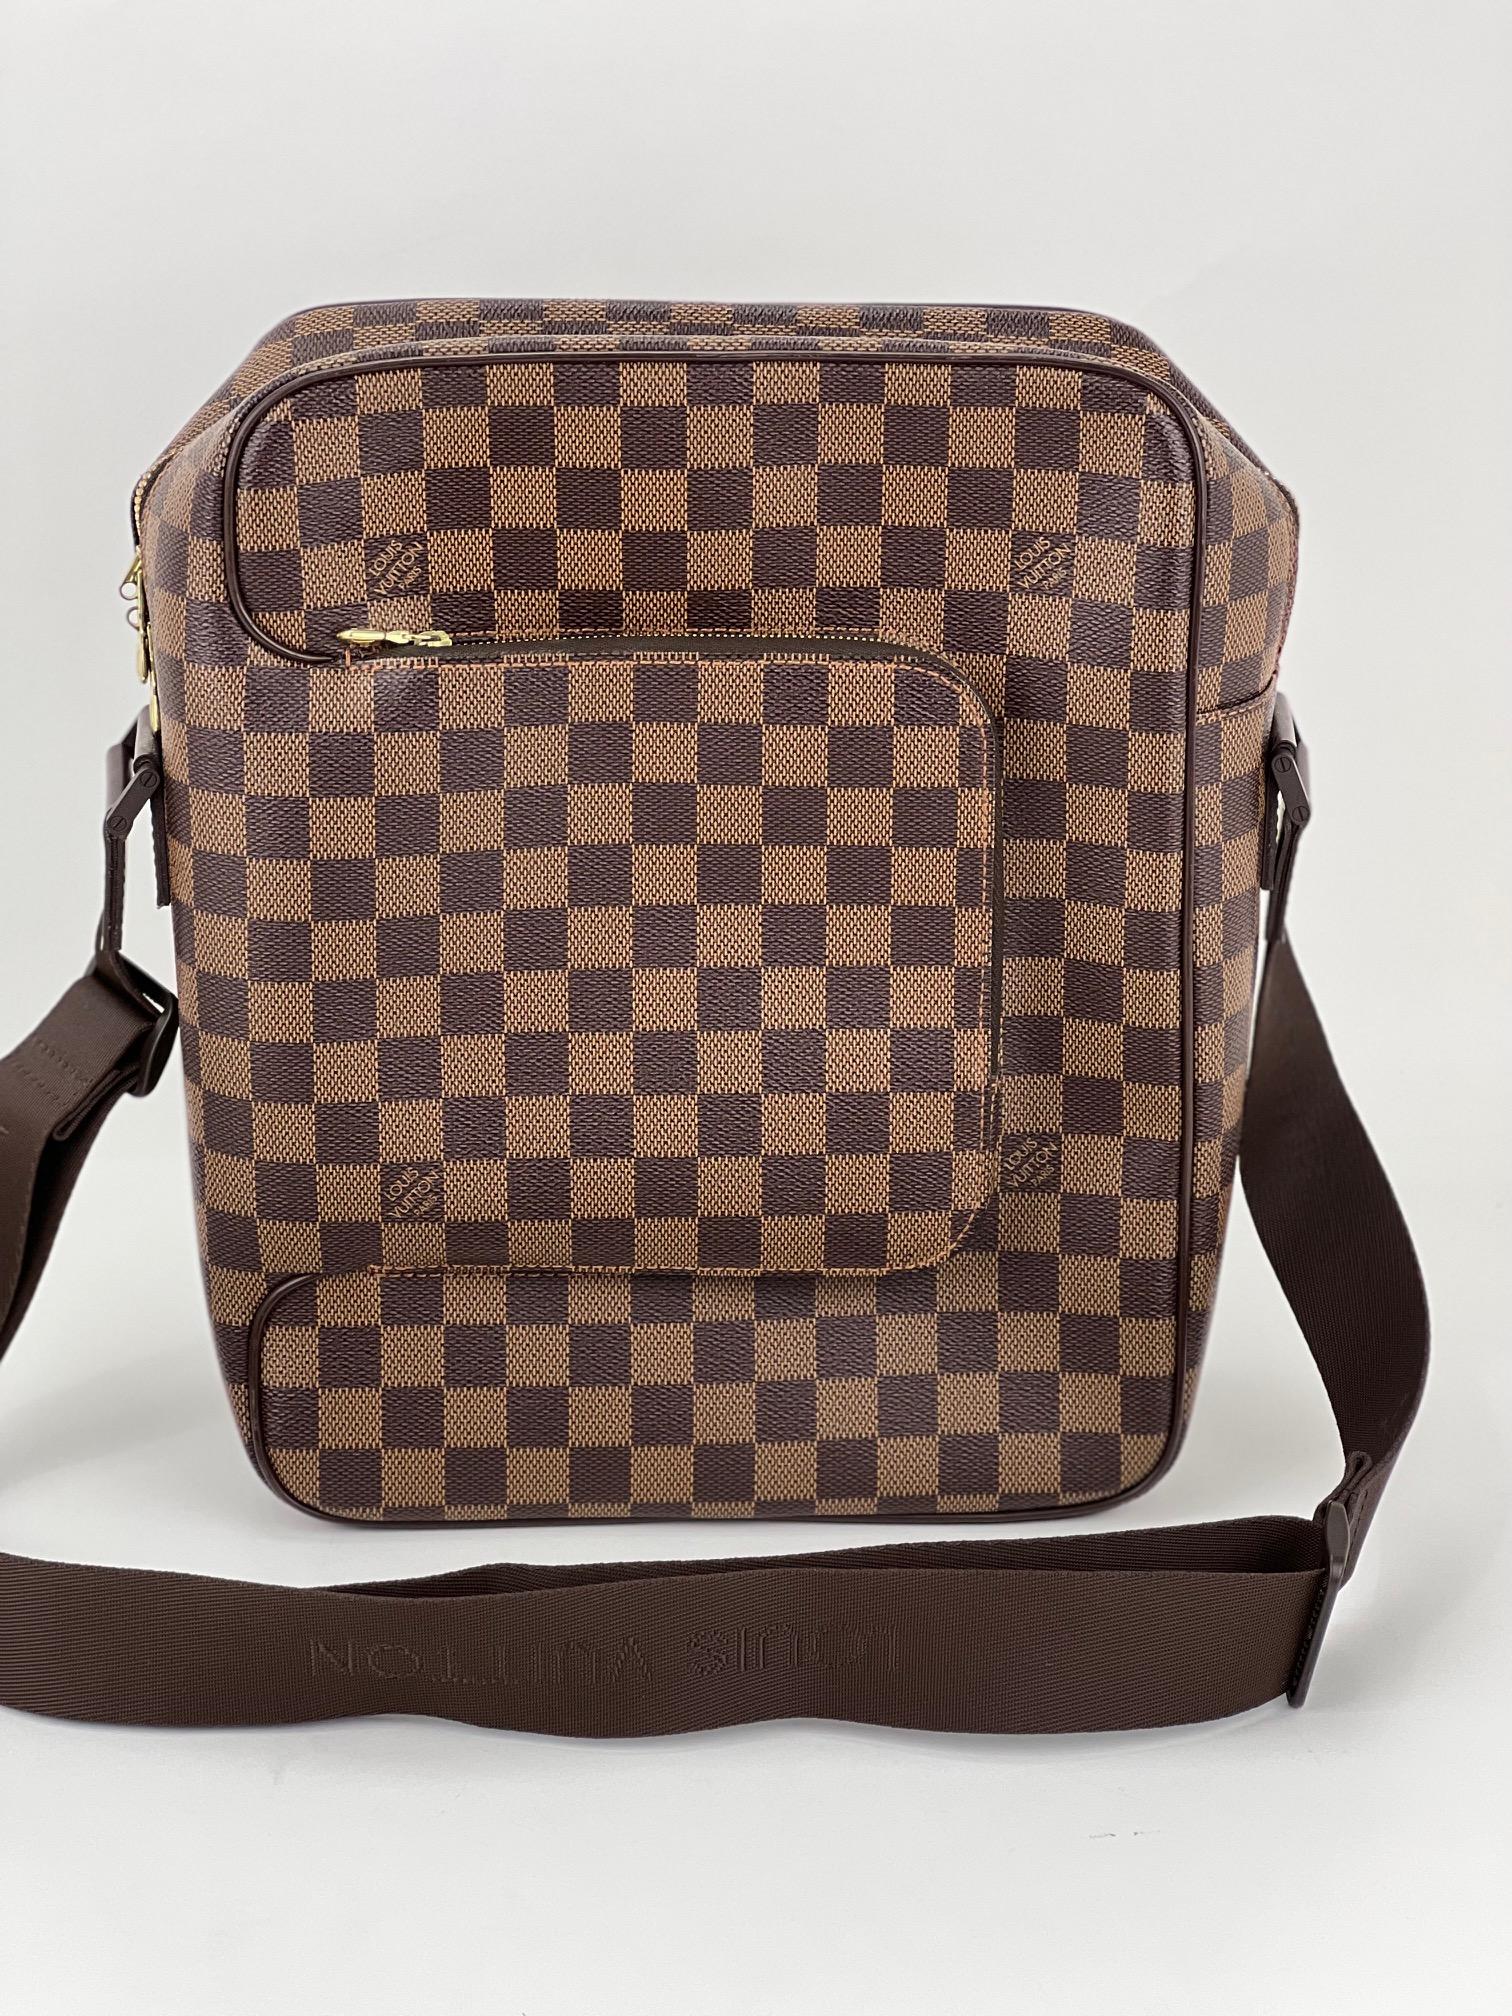 Pre-Owned  100% Authentic
LOUIS VUITTON Olav MM Damier
Ebene Messenger Bag
N41441
RATING: A/B...Very Good, well maintained,
shows minor signs of wear
MATERIAL: damier ebene canvas, leather trim
STRAP: single adjustable canvas strap, excellent